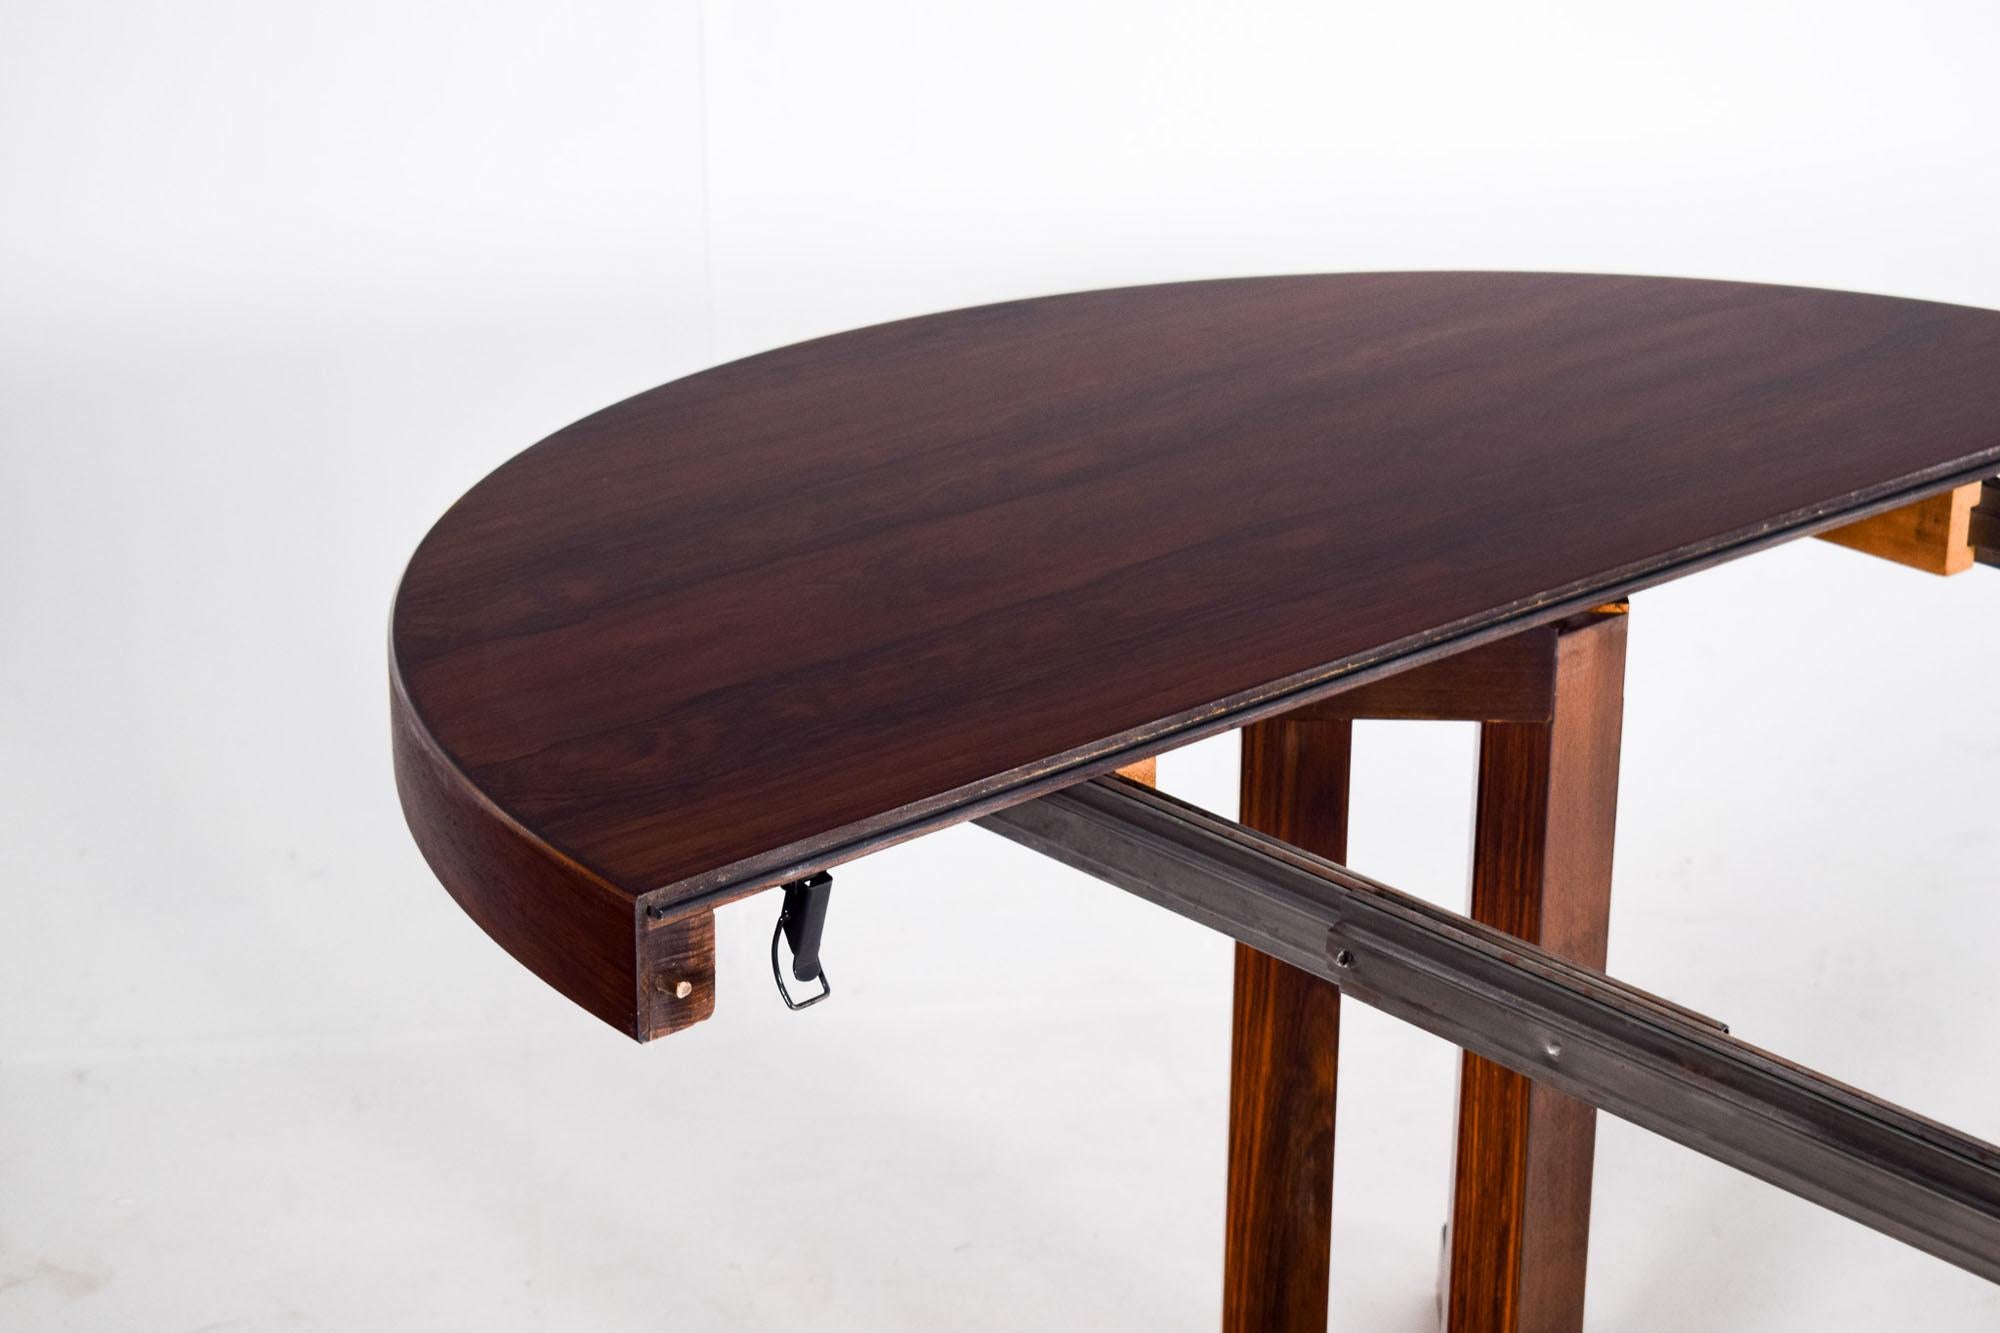 Danish rosewood extending dining table by CJ Rosengaarden, 1960. This large dining table seats 10 to 12 people. Includes four separate extension pieces which can be used individually or together, two with 30 cm each and two with 60 cm each. Total